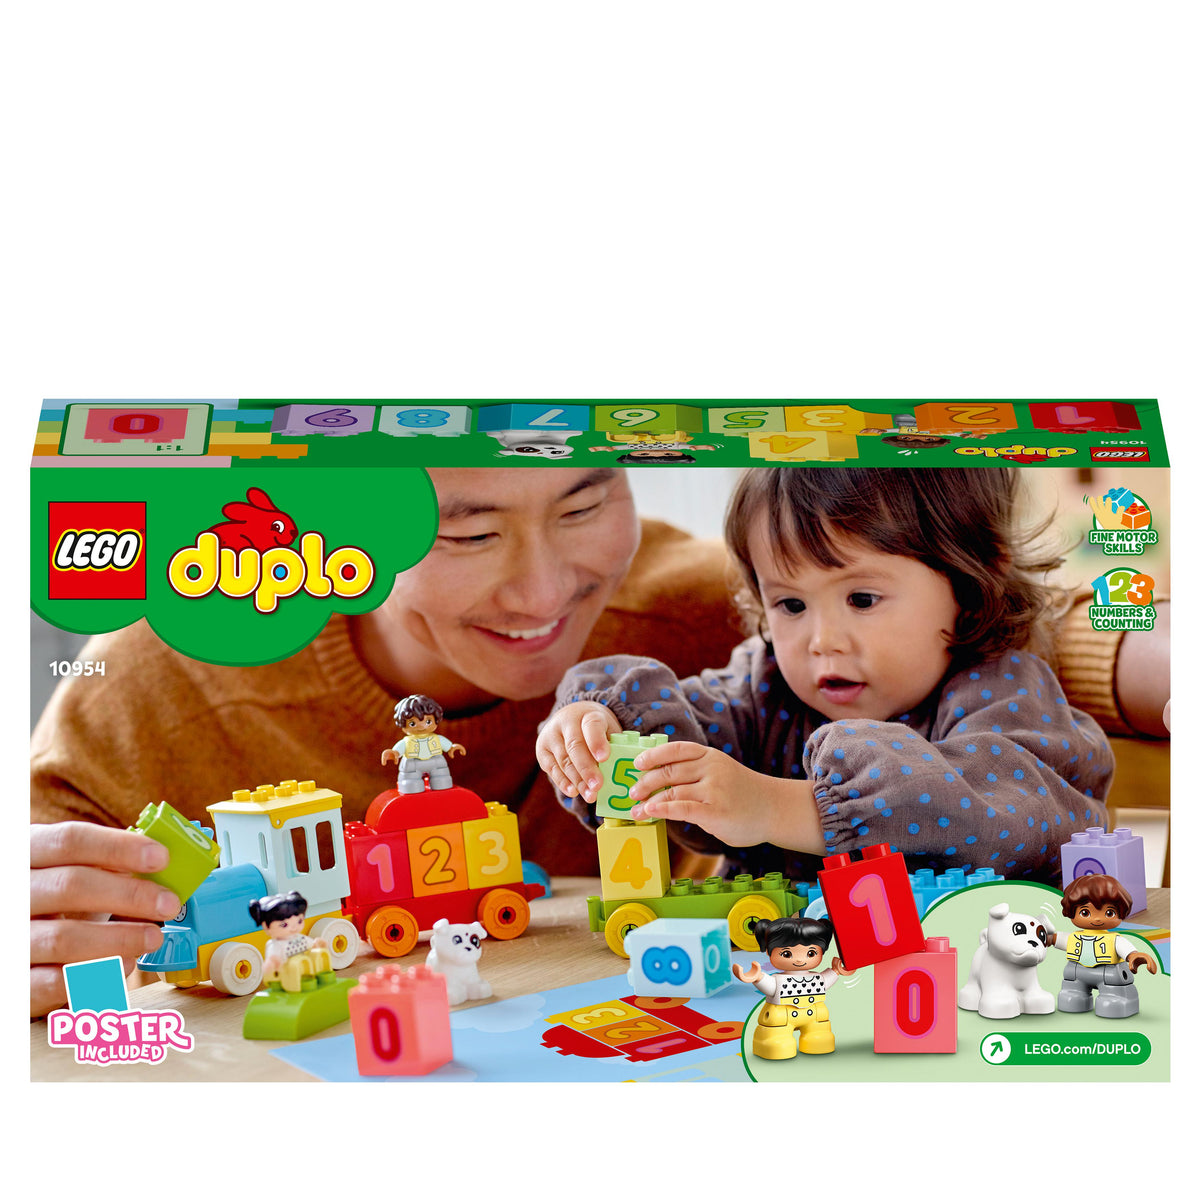 LEGO® DUPLO My First Number Train Toy Set 10954 Default Title